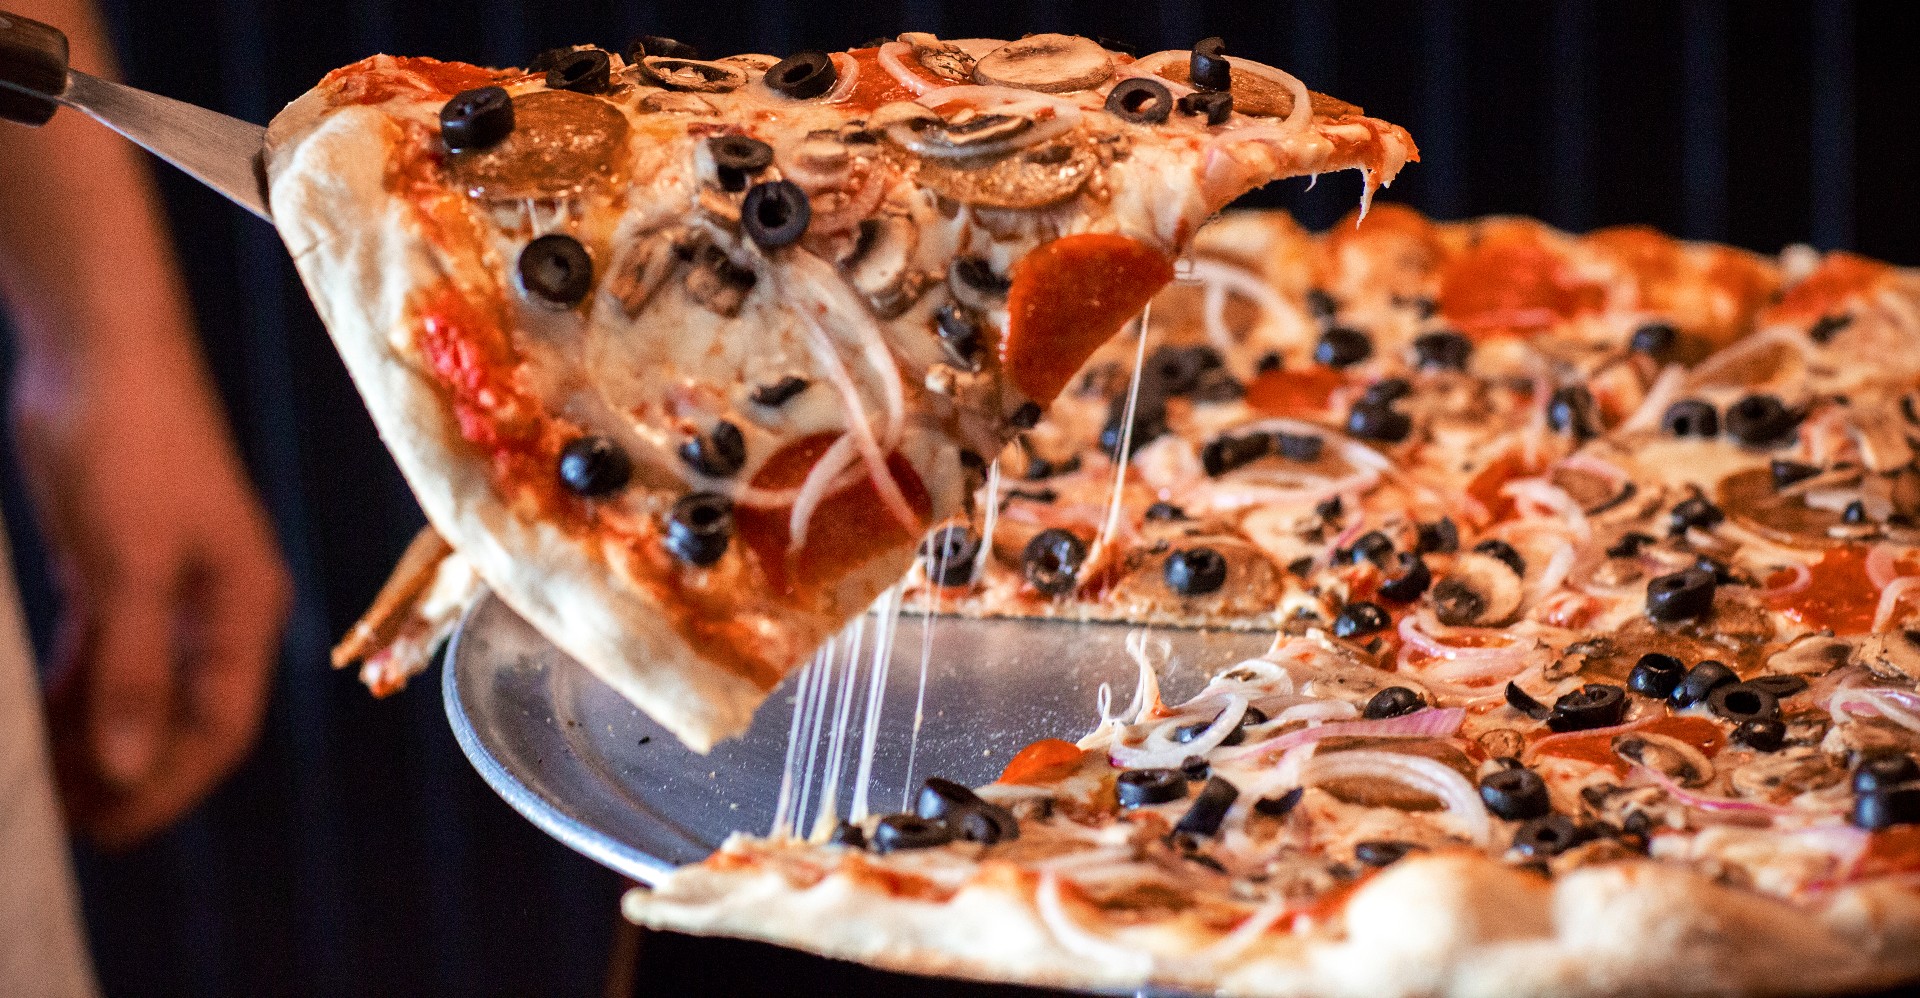 Where to Find Pizza in Sun Valley